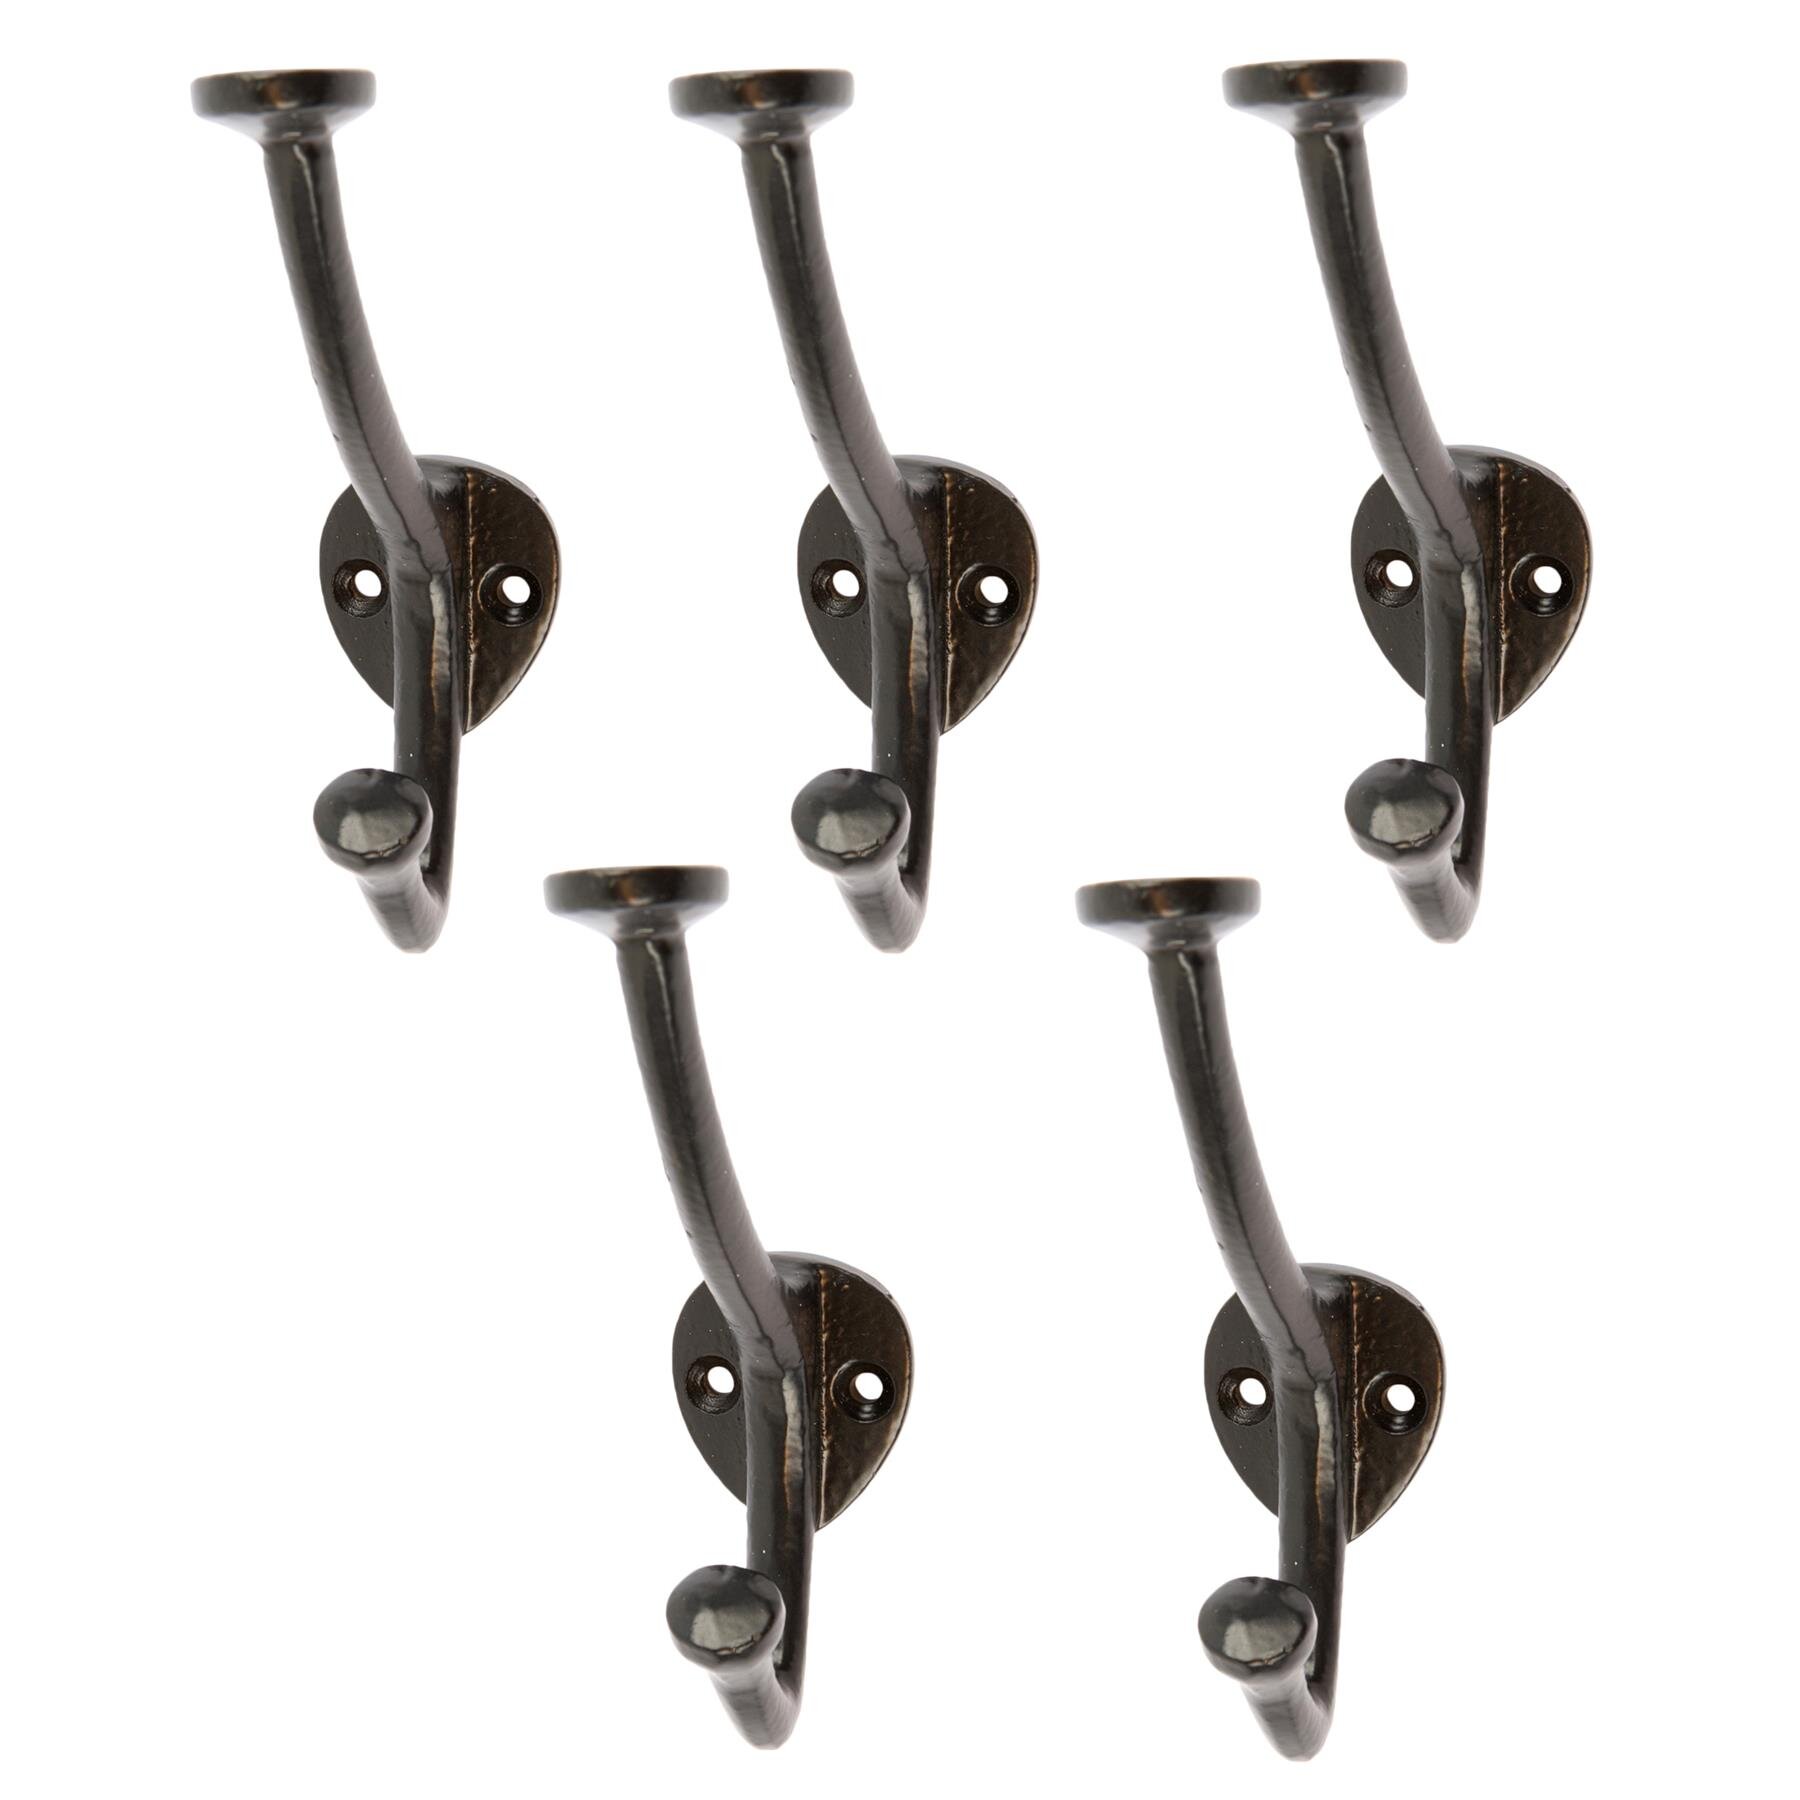 5x Black 35mm x 115mm Bowler and Coat Hook - Cast Iron Vintage Antique Wall Mounted Hanger - by Hammer & Tongs